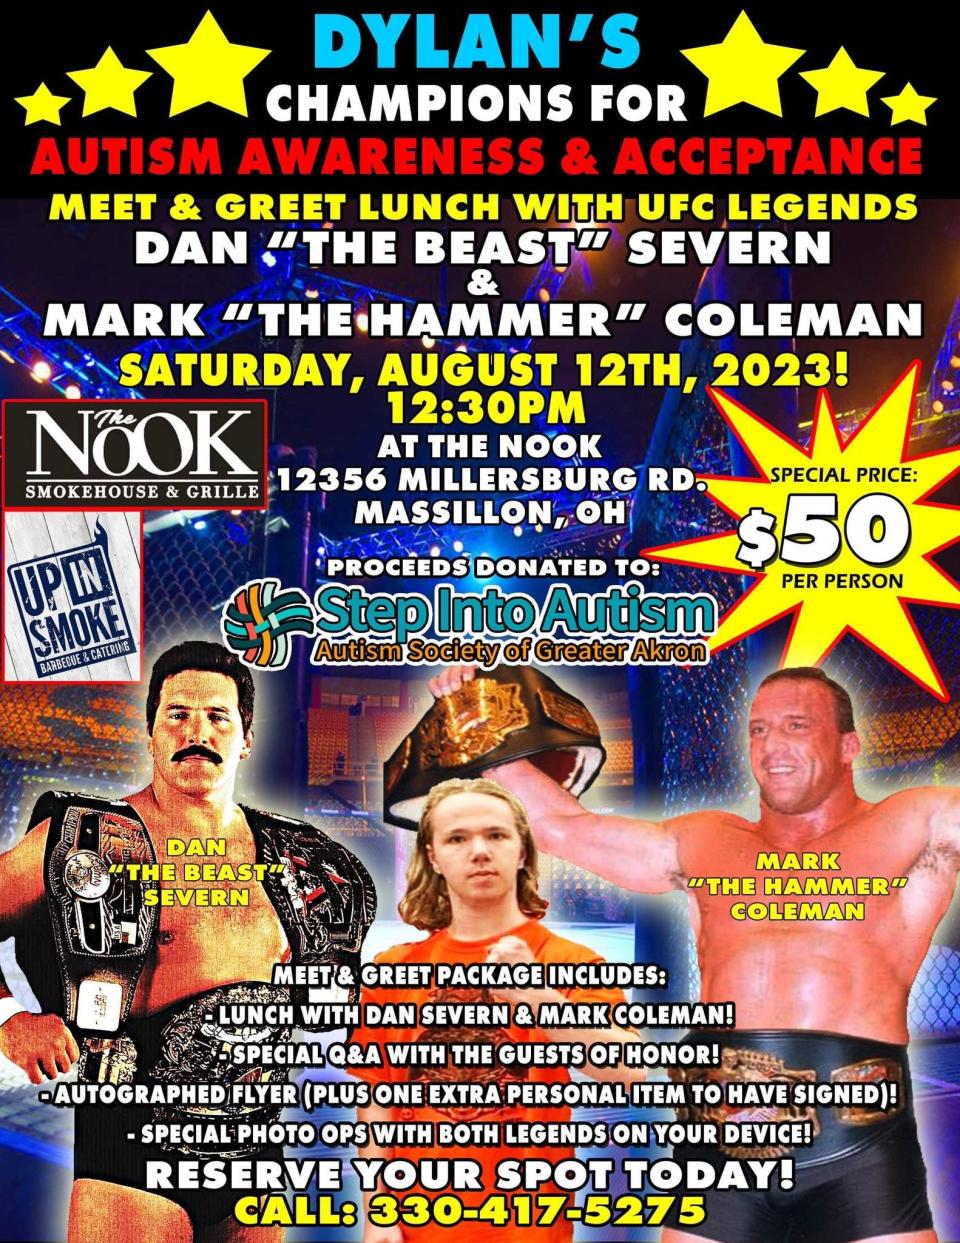 The promotional poster for the Dylan's Champions event featuring MMA legends Mark "The Hammer" Coleman and Dan "The Beast Severn."